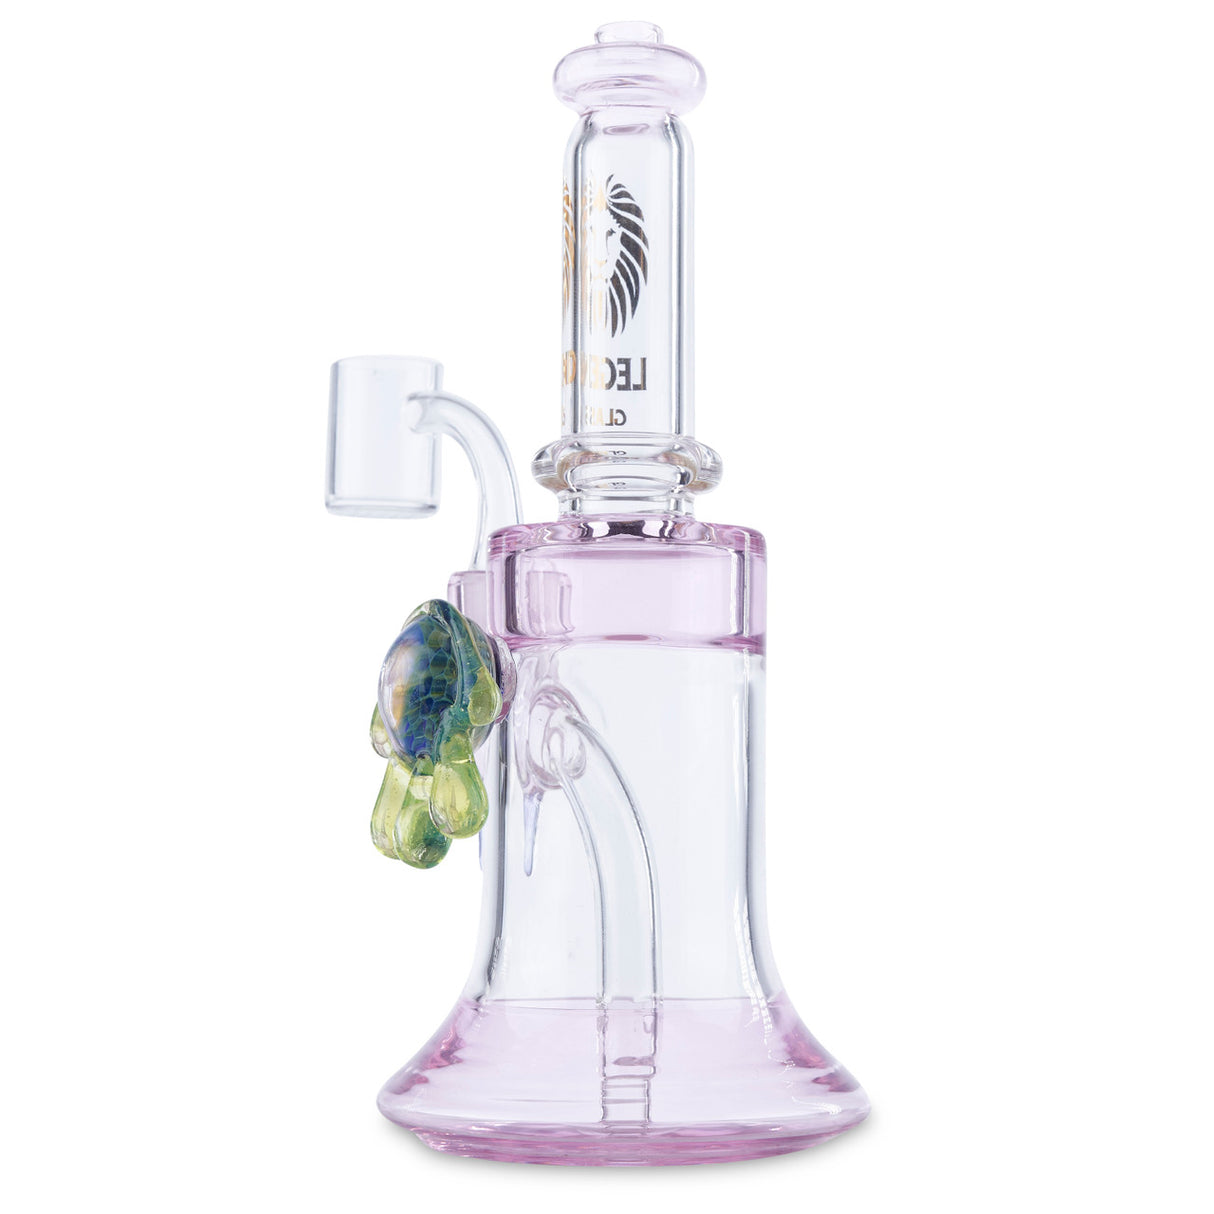 legend glass heady banger hanger dab rig water pipe on sale